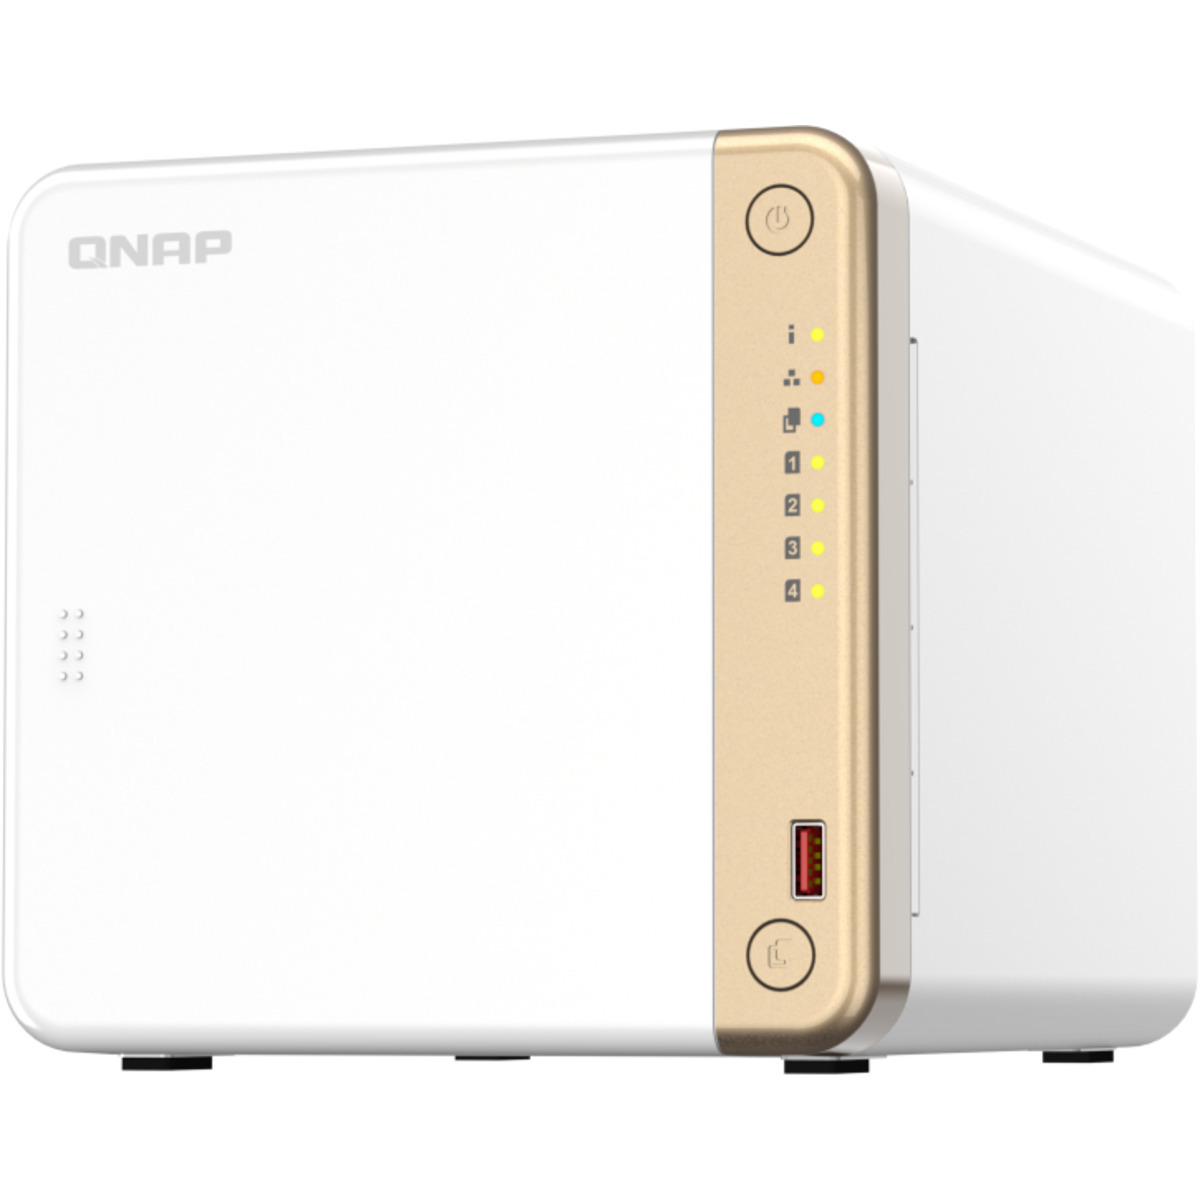 QNAP TS-462 32tb 4-Bay Desktop Multimedia / Power User / Business NAS - Network Attached Storage Device 4x8tb Western Digital Red Pro WD8003FFBX 3.5 7200rpm SATA 6Gb/s HDD NAS Class Drives Installed - Burn-In Tested - ON SALE TS-462